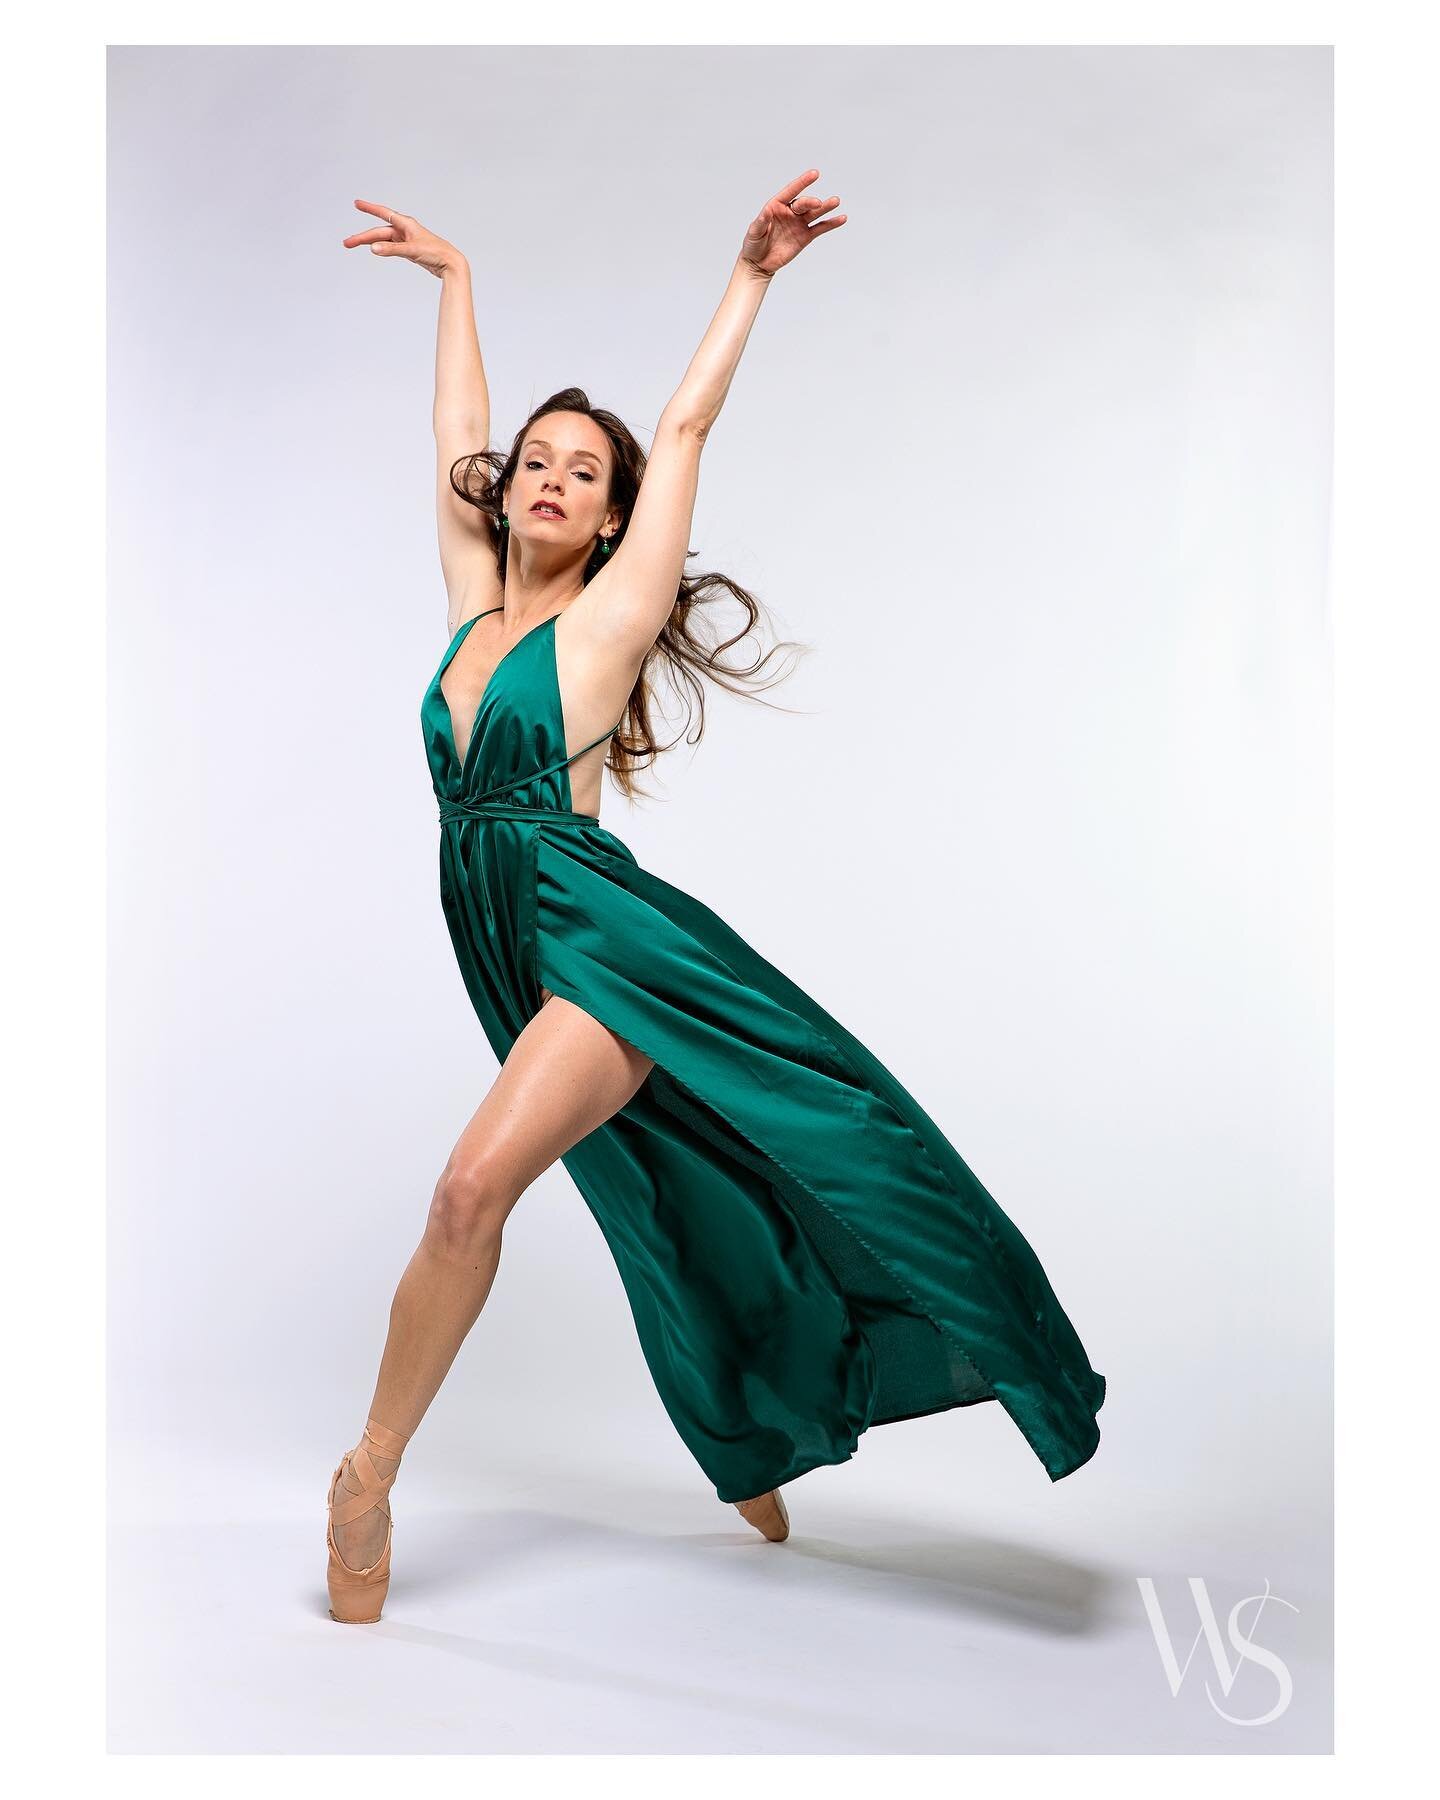 &quot;May your pockets be heavy and your heart be light. May good luck pursue you each morning and night.&quot; Irish Blessing

Dancer | @rekagyulai 
📸 @wingrove.studios.photography 

#dancephotography #balletphotography #sandiegophotographer #dance